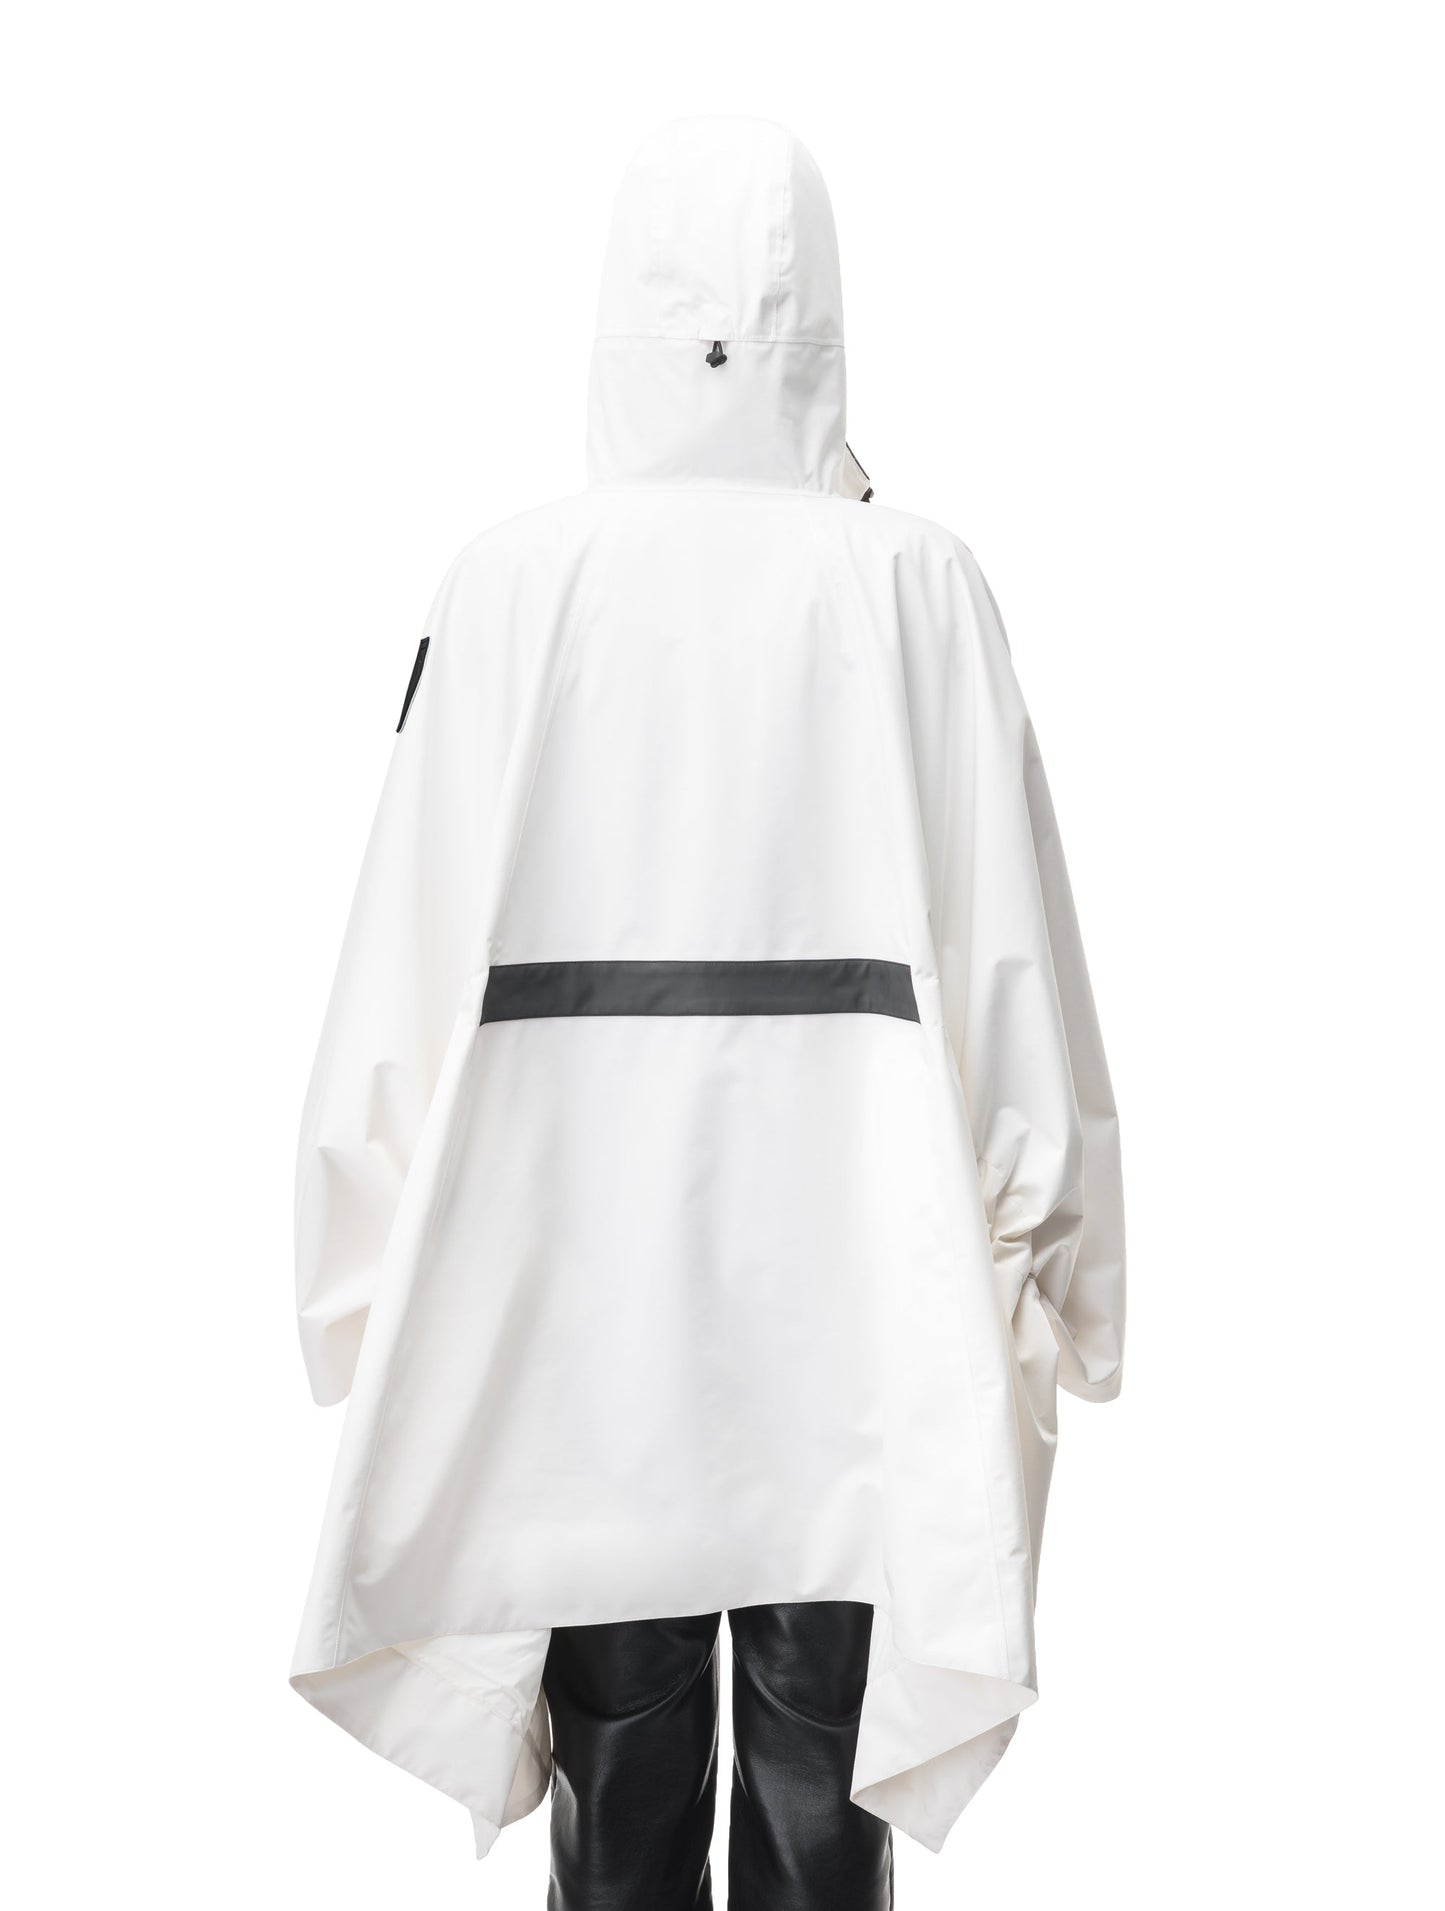 Hydra Unisex Performance Poncho in thigh length, non-removable hood, vertical half-zipper along centre front collar, hidden side-entry waist zipper pockets, adjustable webbing straps and snap closure cuffs, and packable to front kangaroo pocket with flap opening, in Chalk